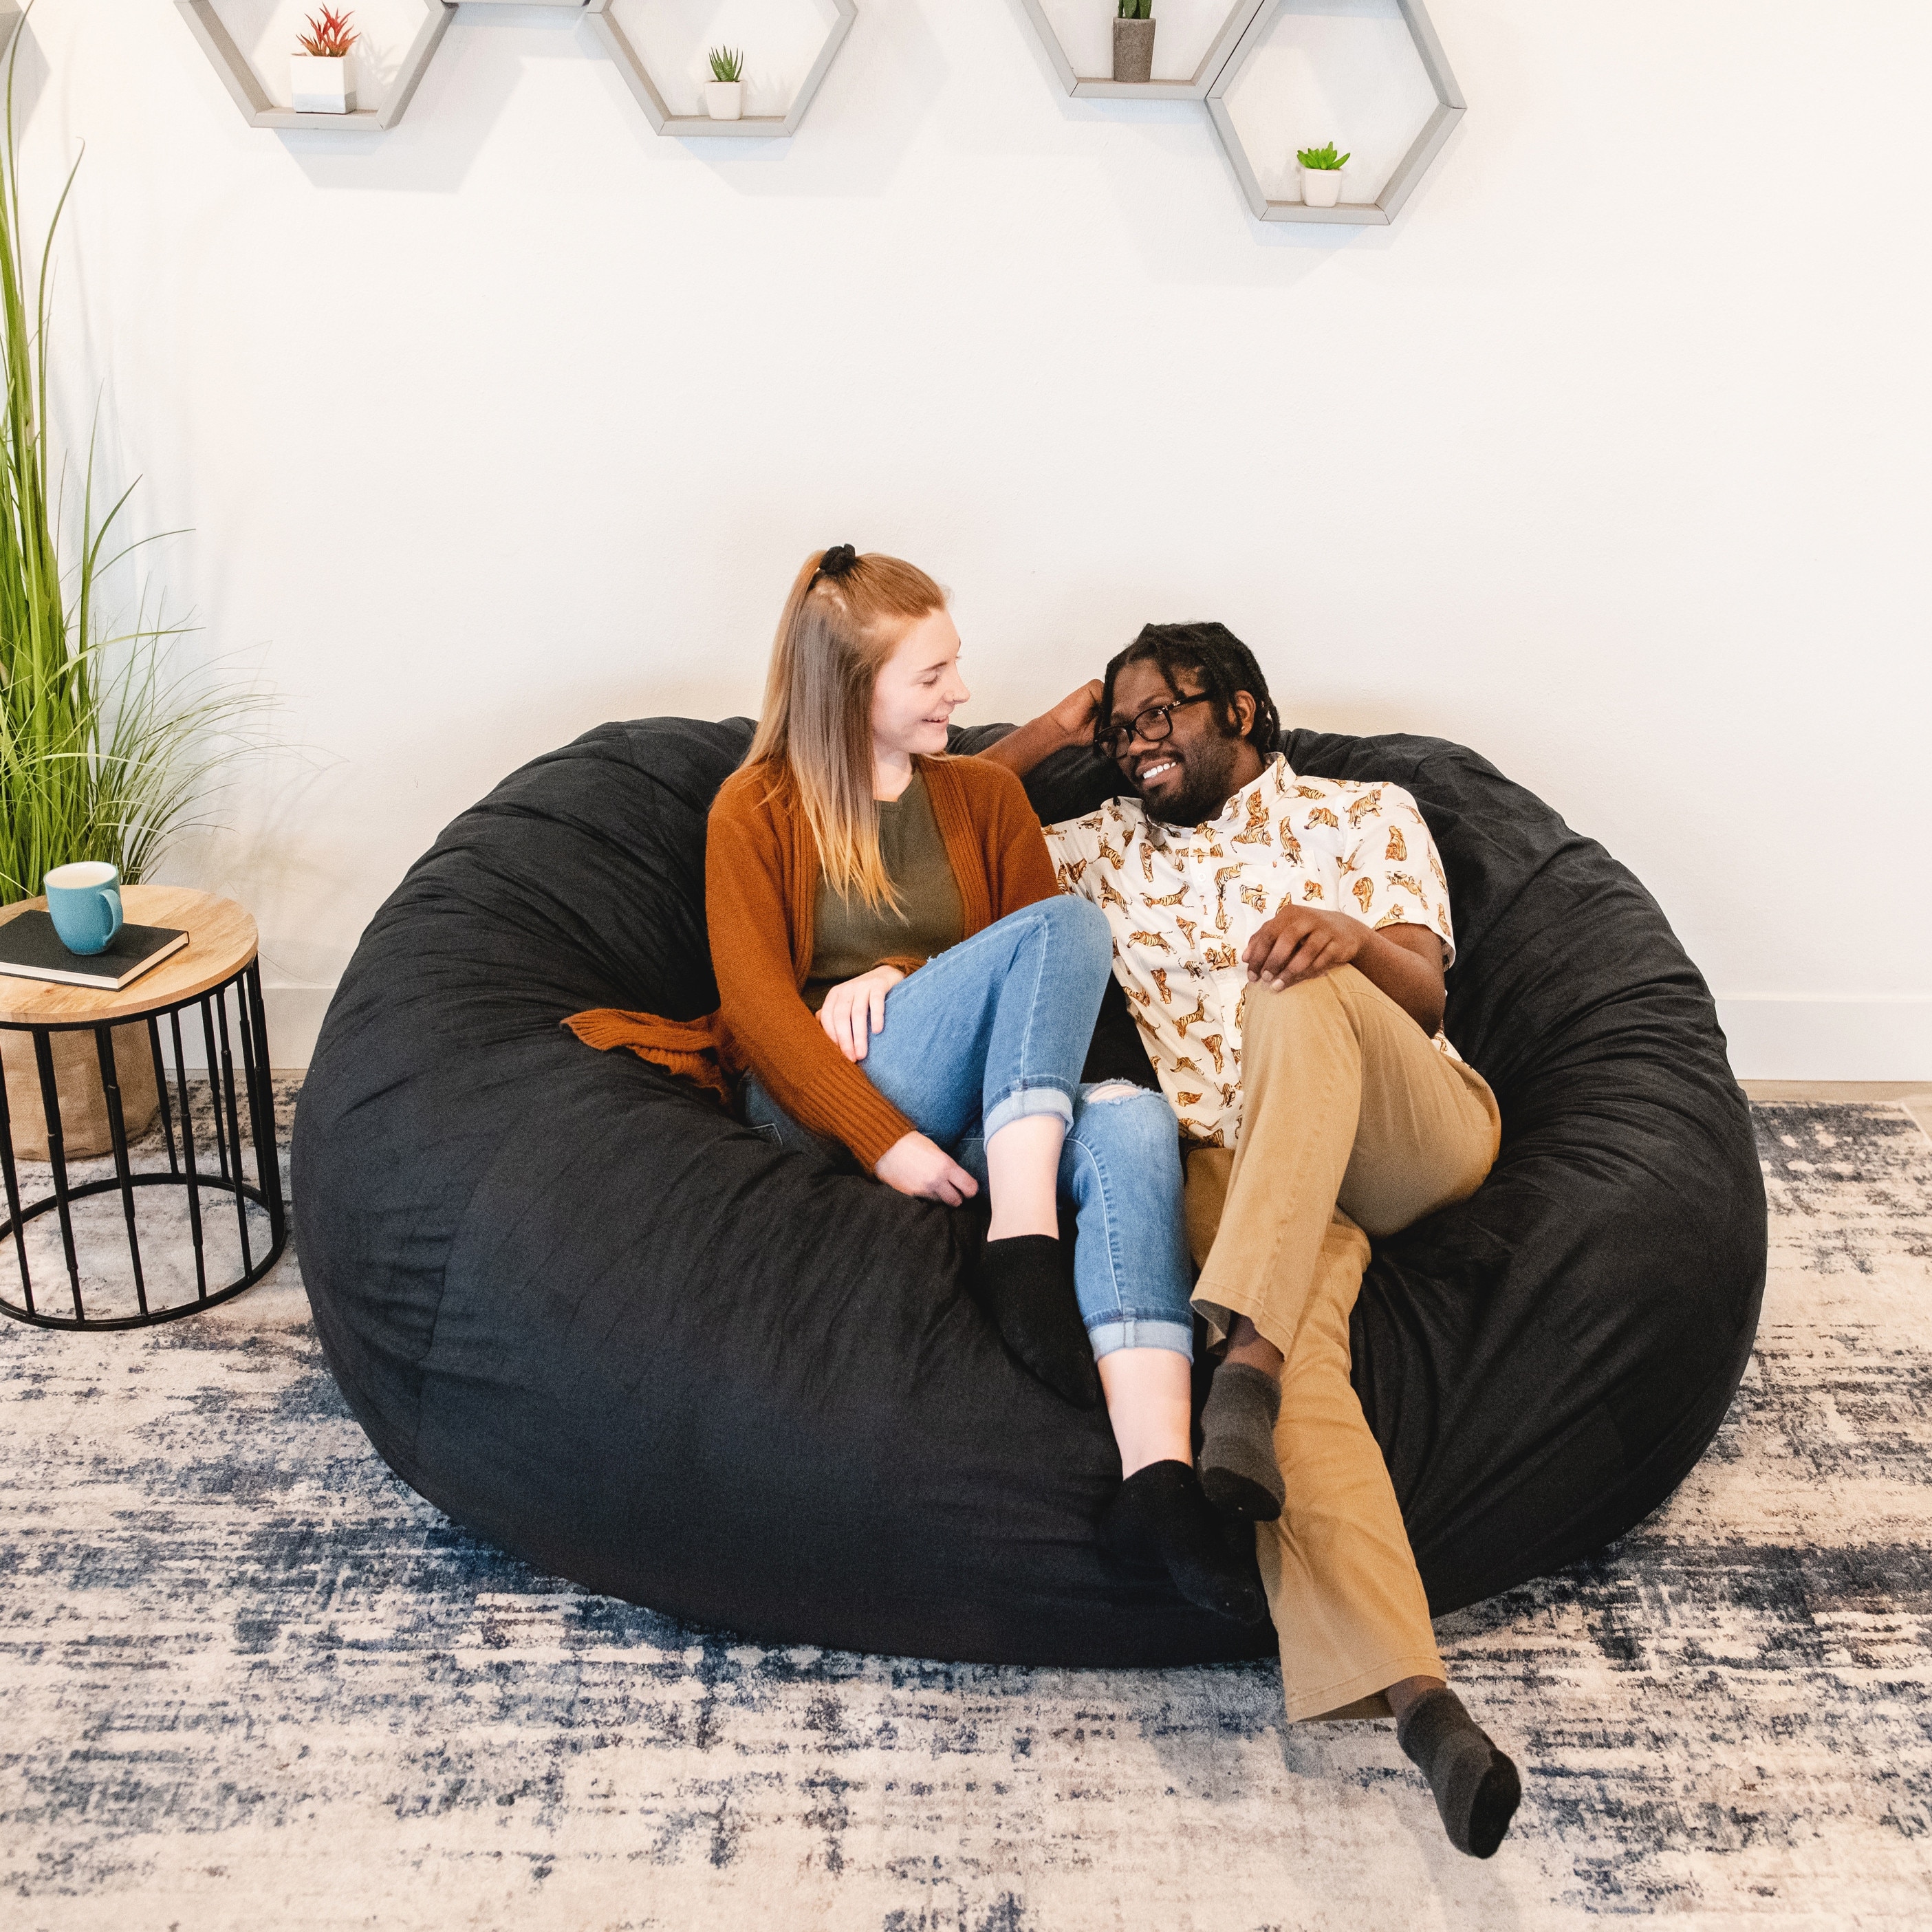 https://ak1.ostkcdn.com/images/products/is/images/direct/2408855217bbaab75807bd1e55492adfe7431958/Big-Joe-XXL-Fuf-Bean-Bag-Chair-%28Removable-Cover%29.jpg